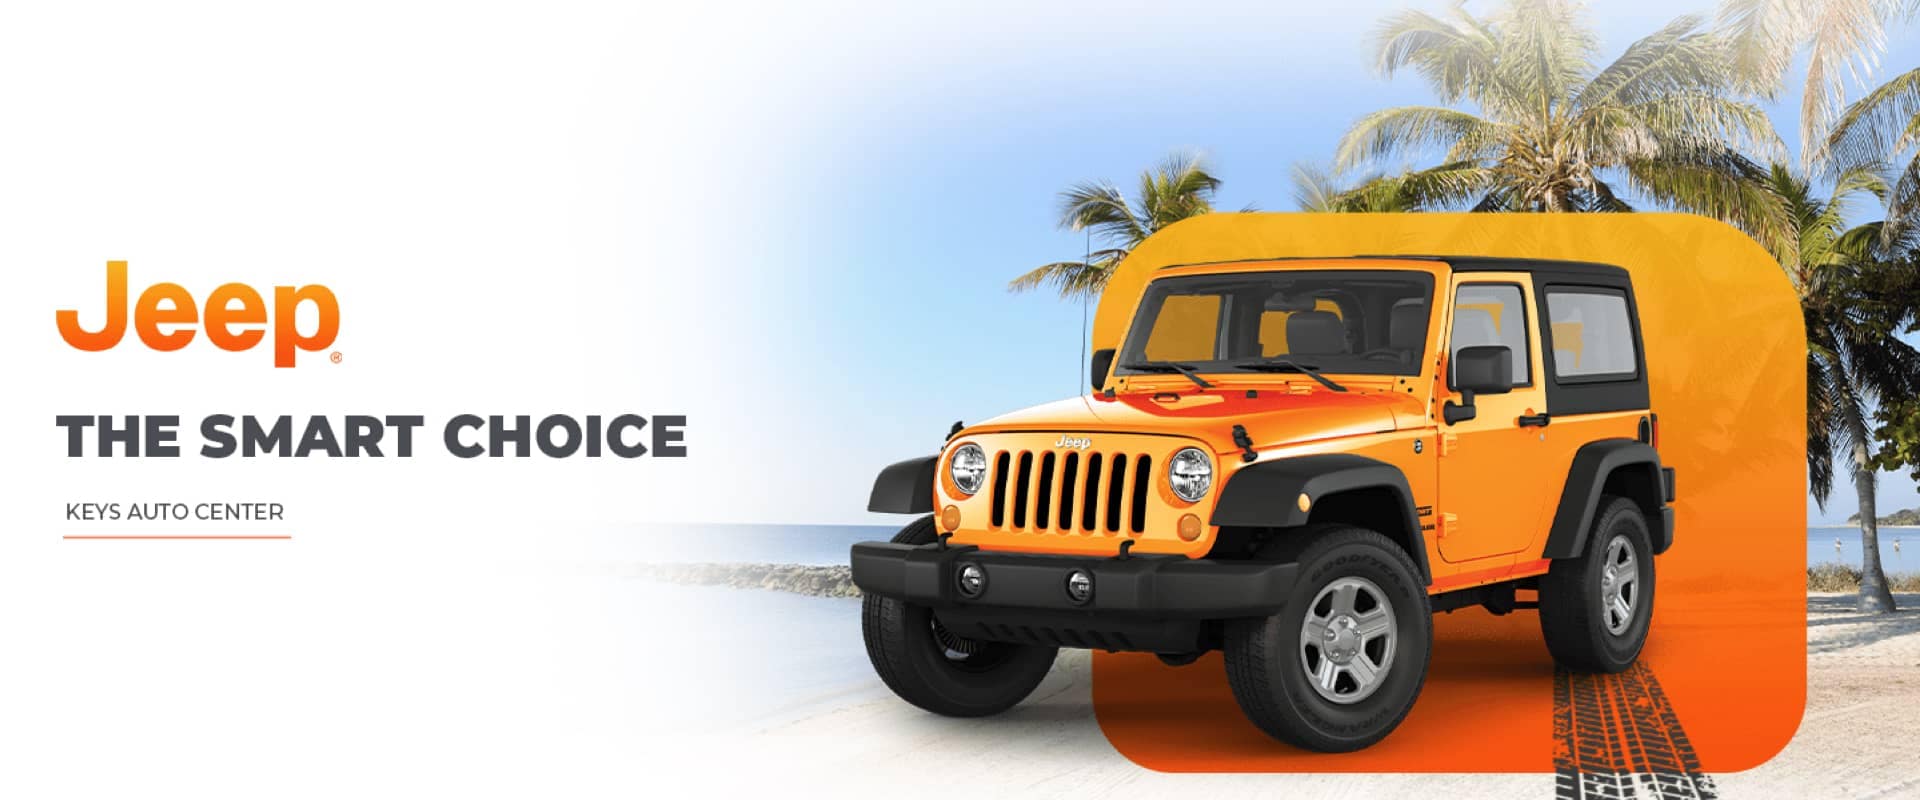 The Smart Choice for Jeep Vehicles - Keys Auto Center